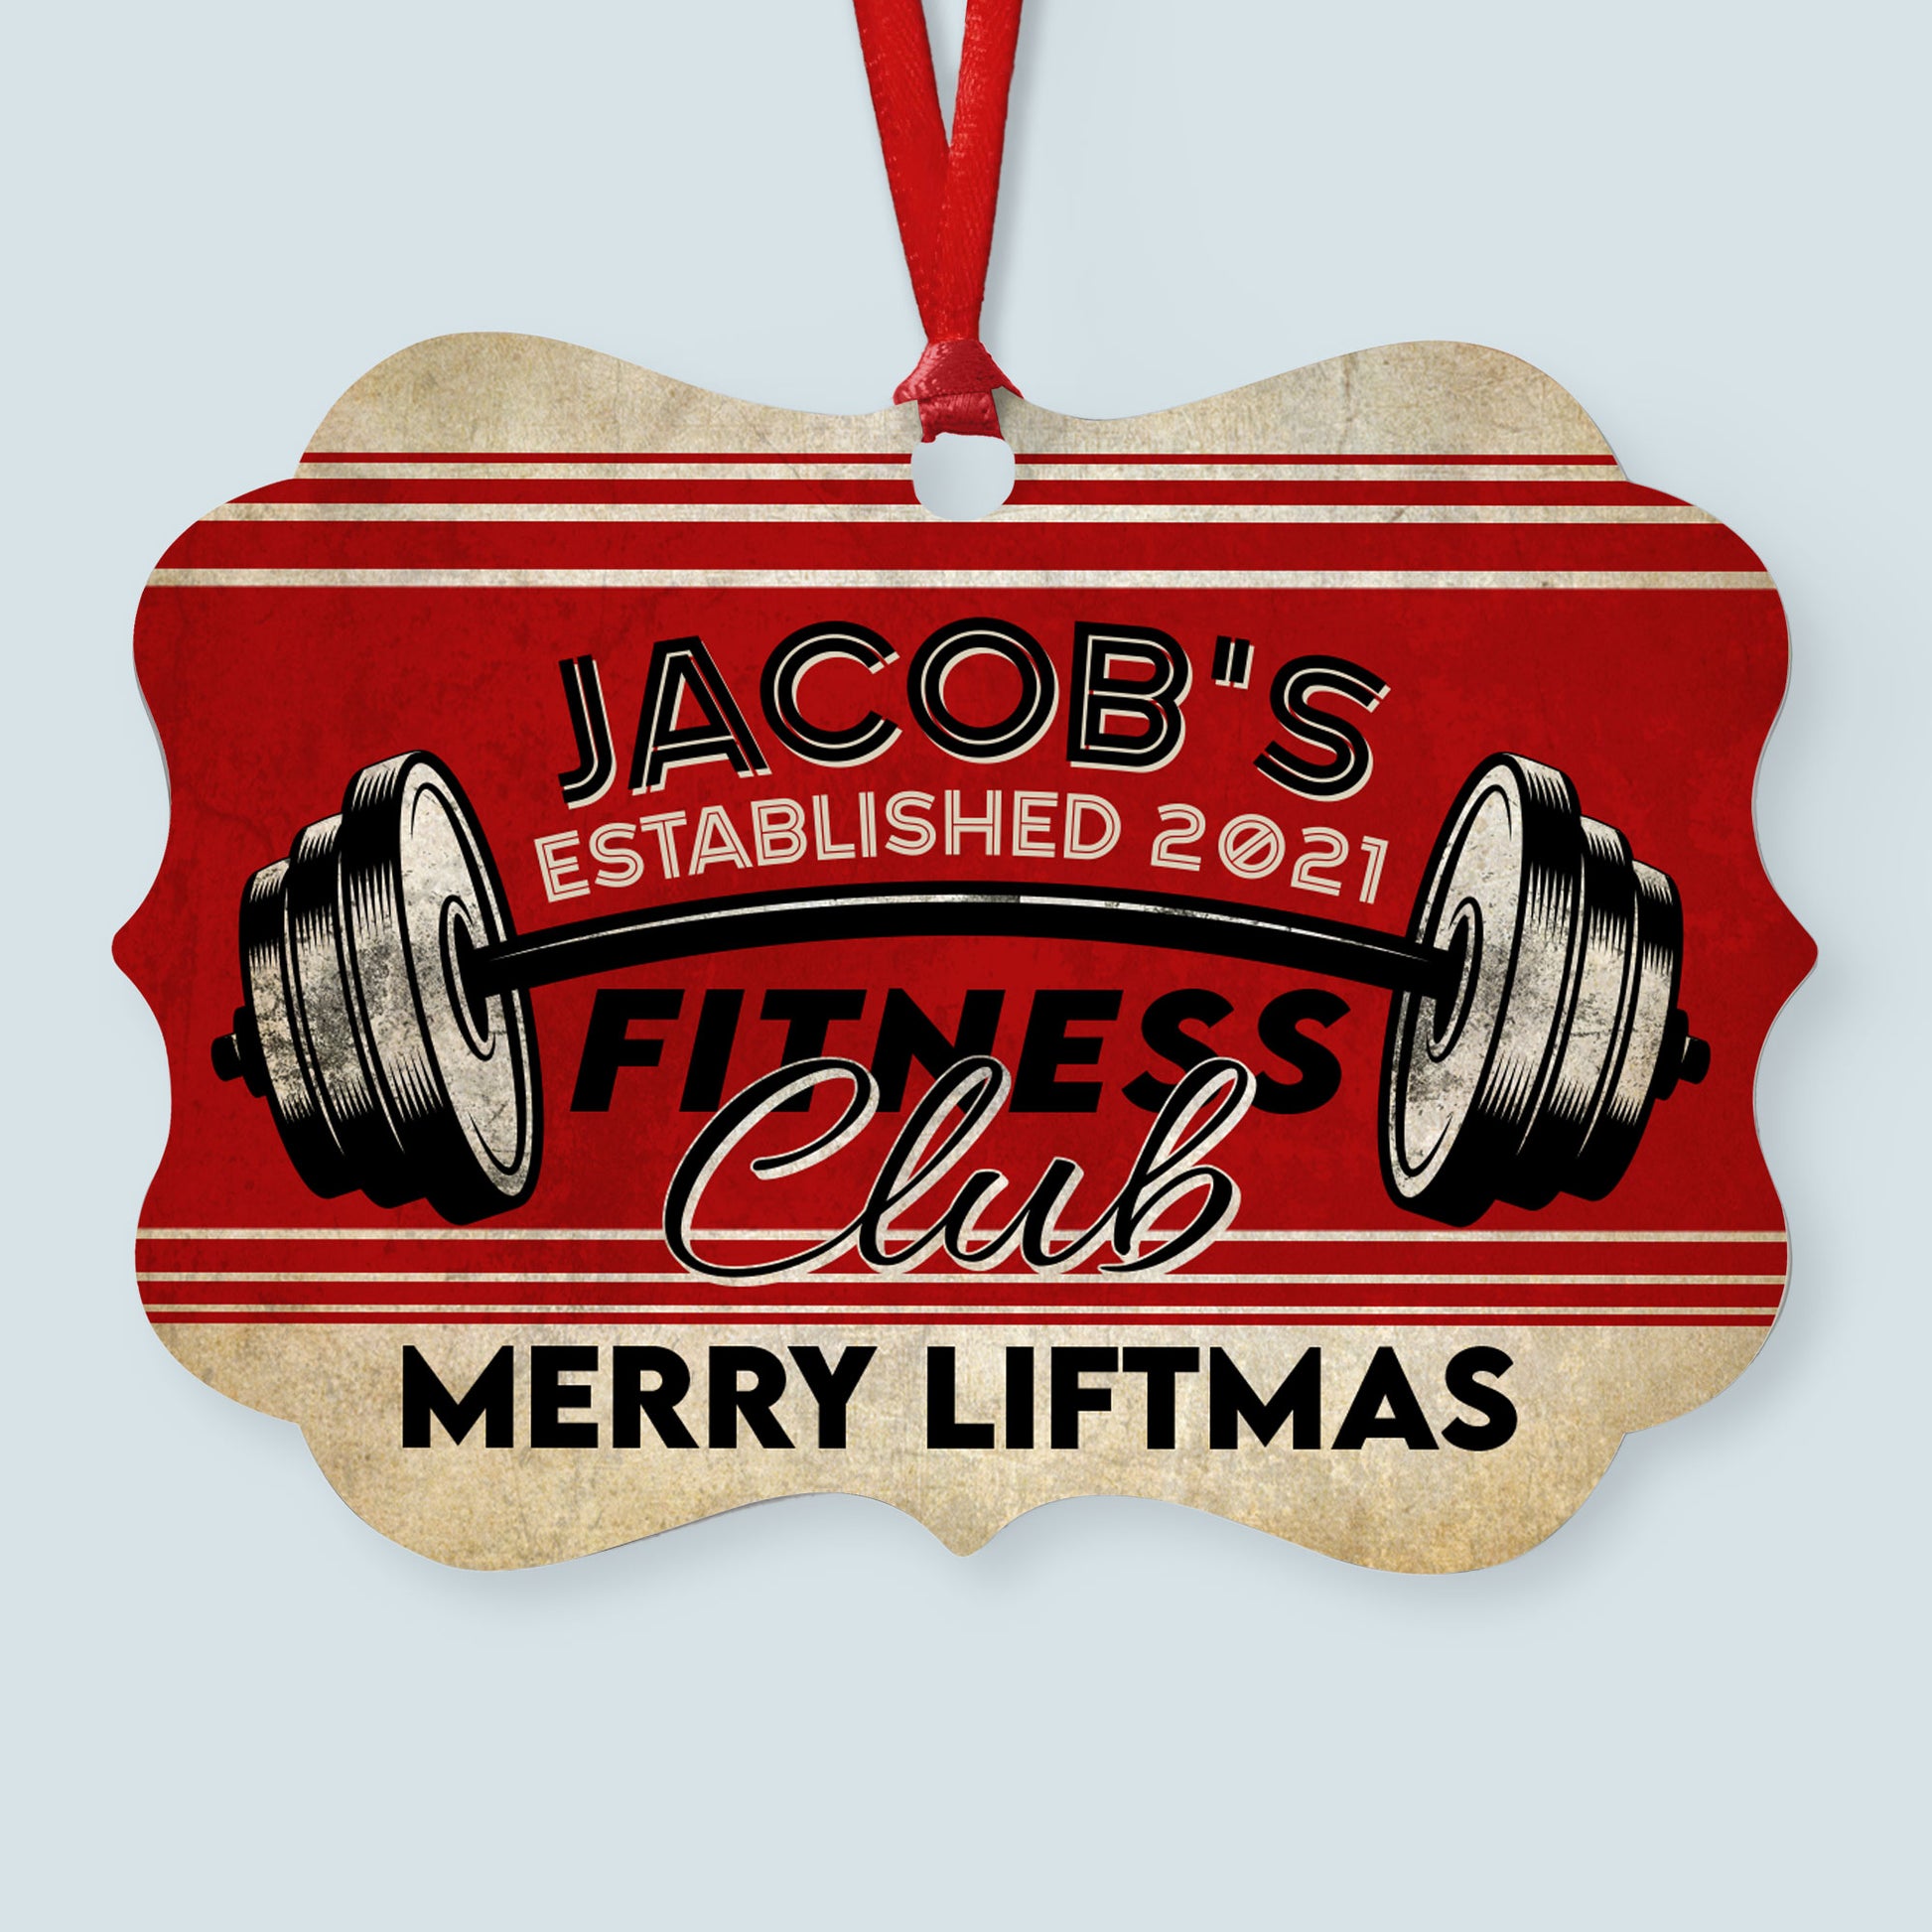 Merry Liftmas - Personalized Aluminum Ornament - Christmas Gift For Fitness Lovers, Fitness Club